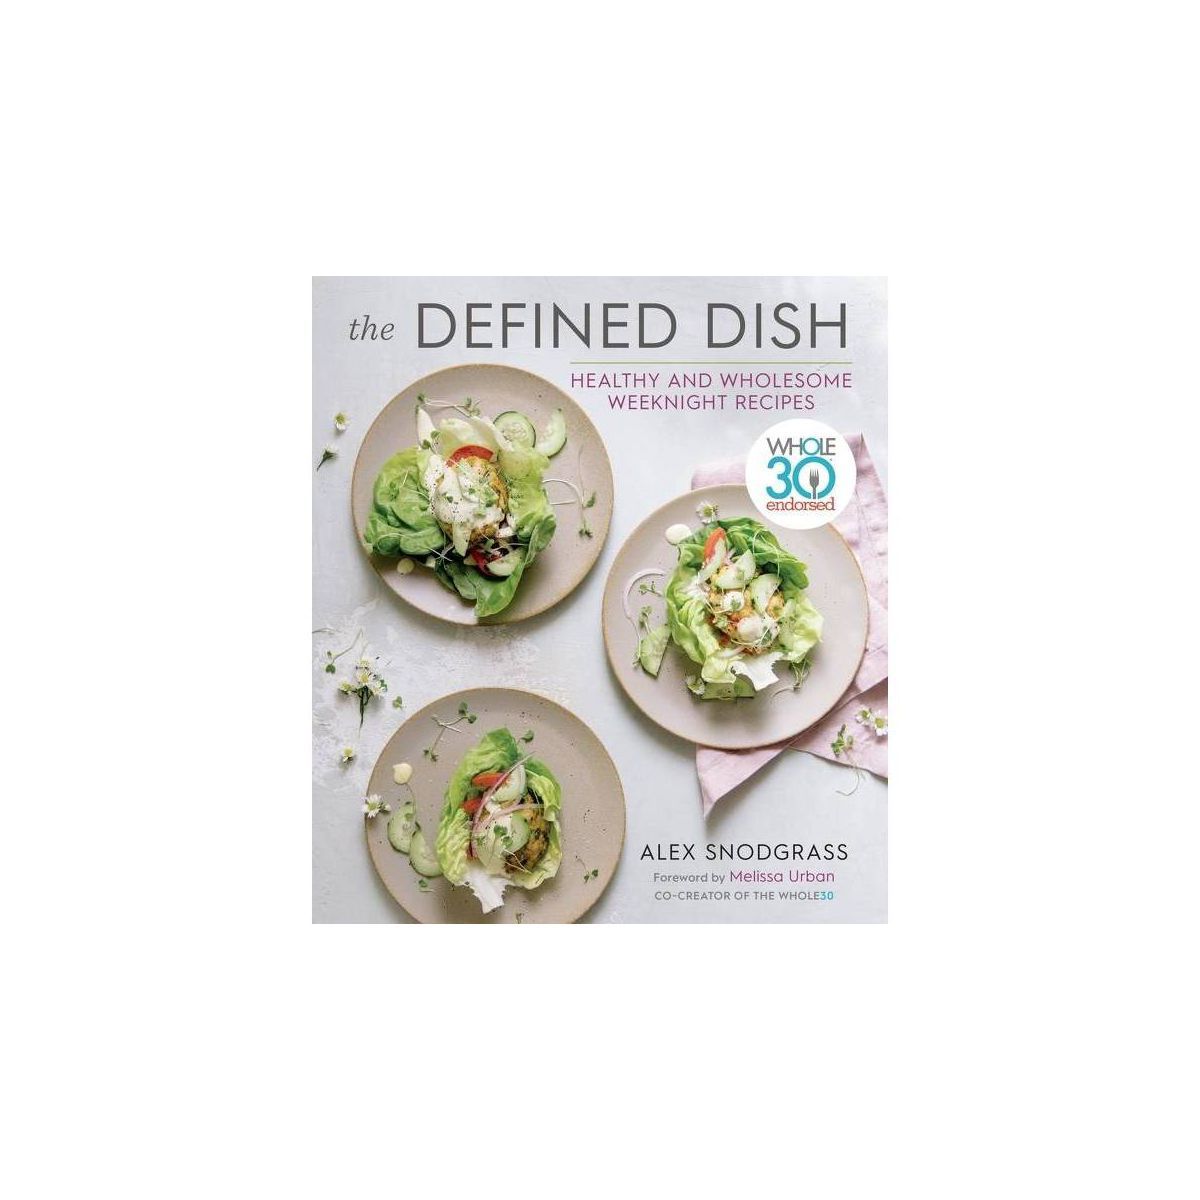 The Defined Dish - by Alex Snodgrass (Hardcover) | Target